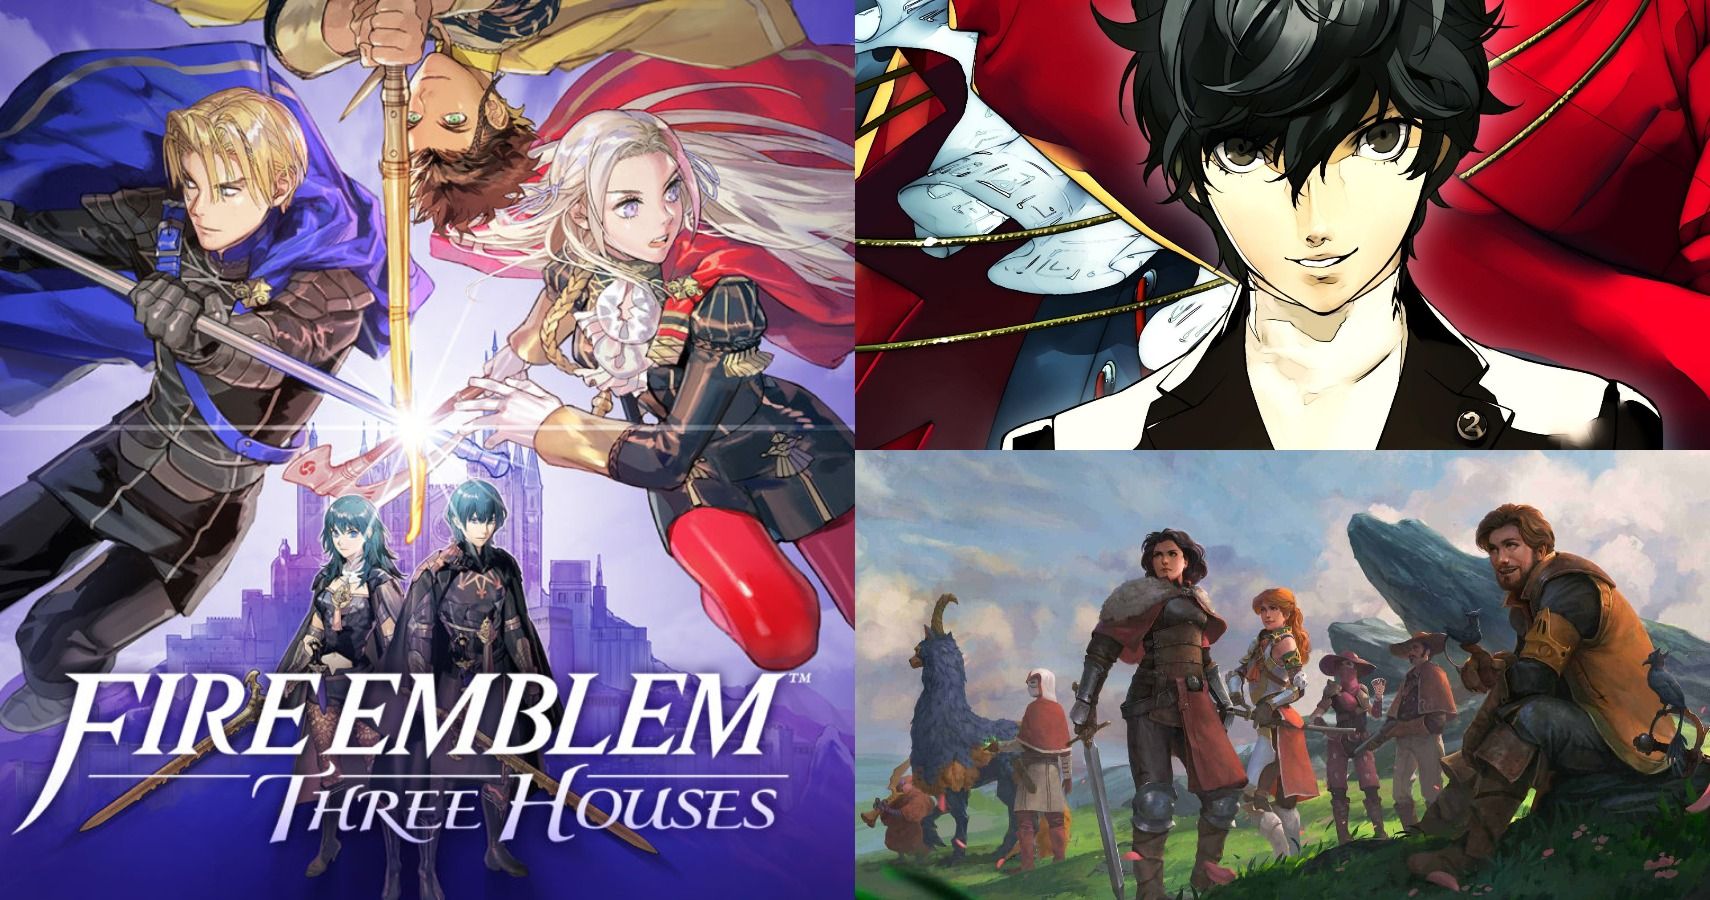 17 Games Play If You Fire Emblem: Three Houses